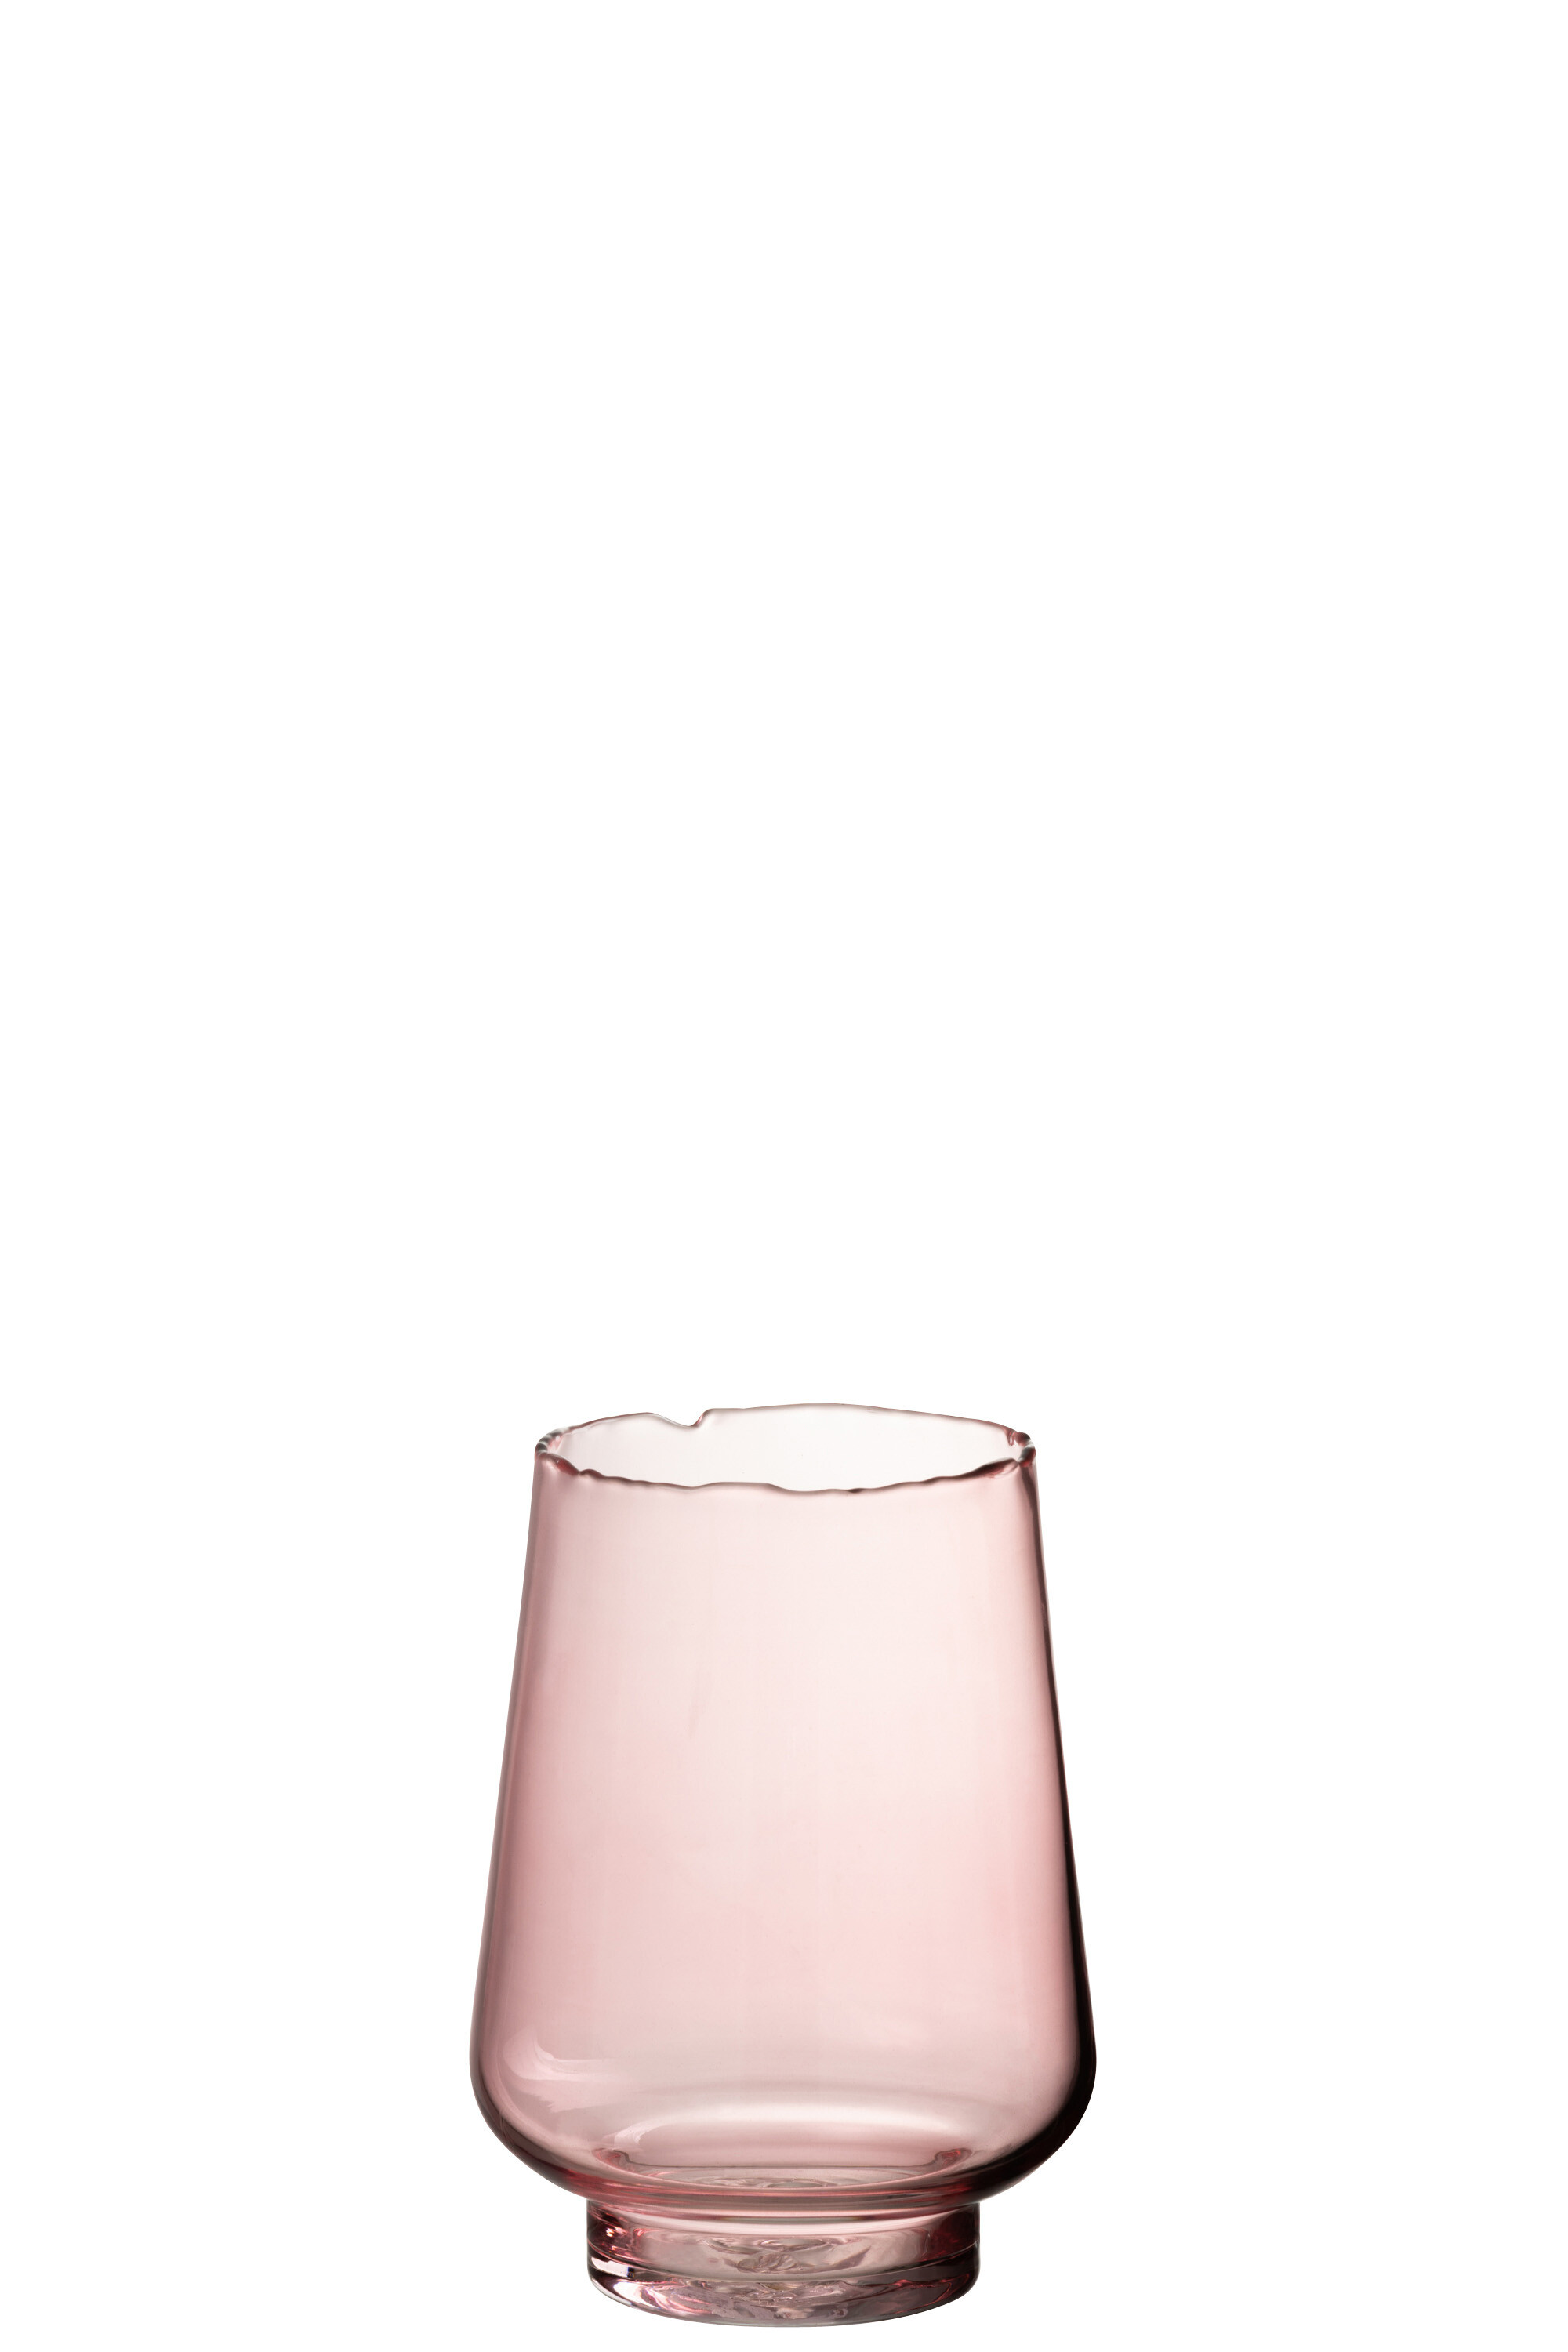 TLH WAVY EDGE GLASS PINK S